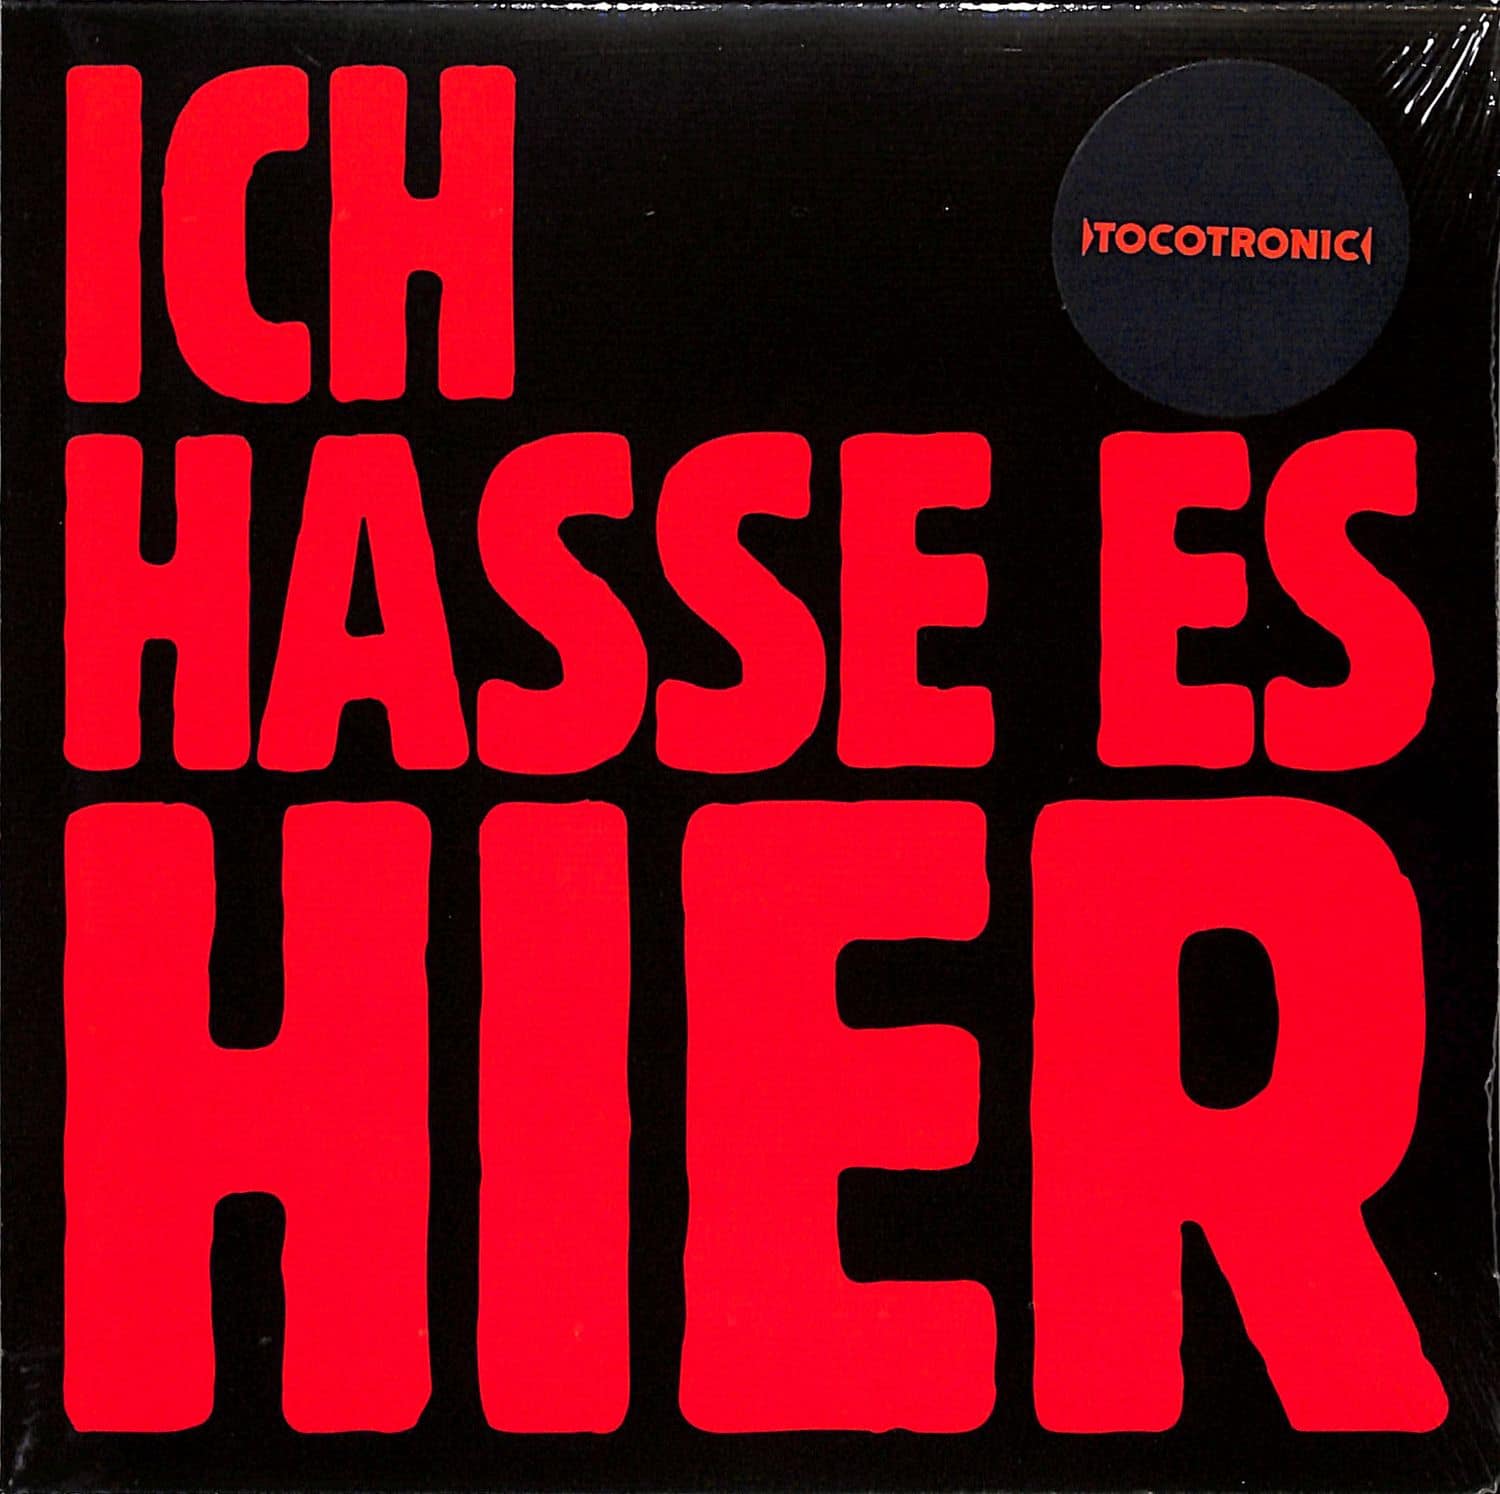 Tocotronic - ICH HASSE ES HIER / LIEBE 